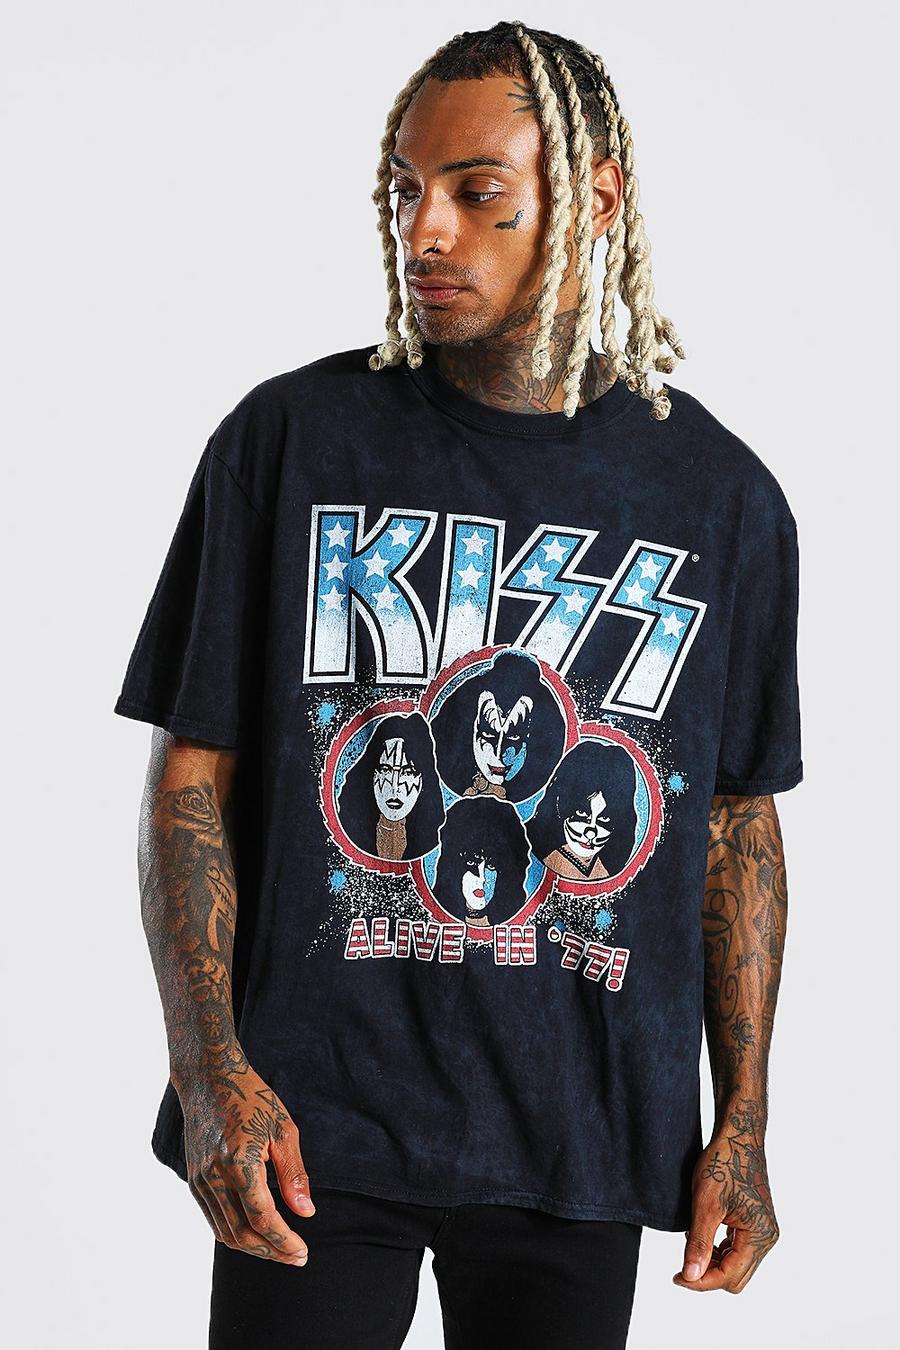 T-shirt oversize in lavaggio acido ufficiale dei Kiss, Charcoal image number 1